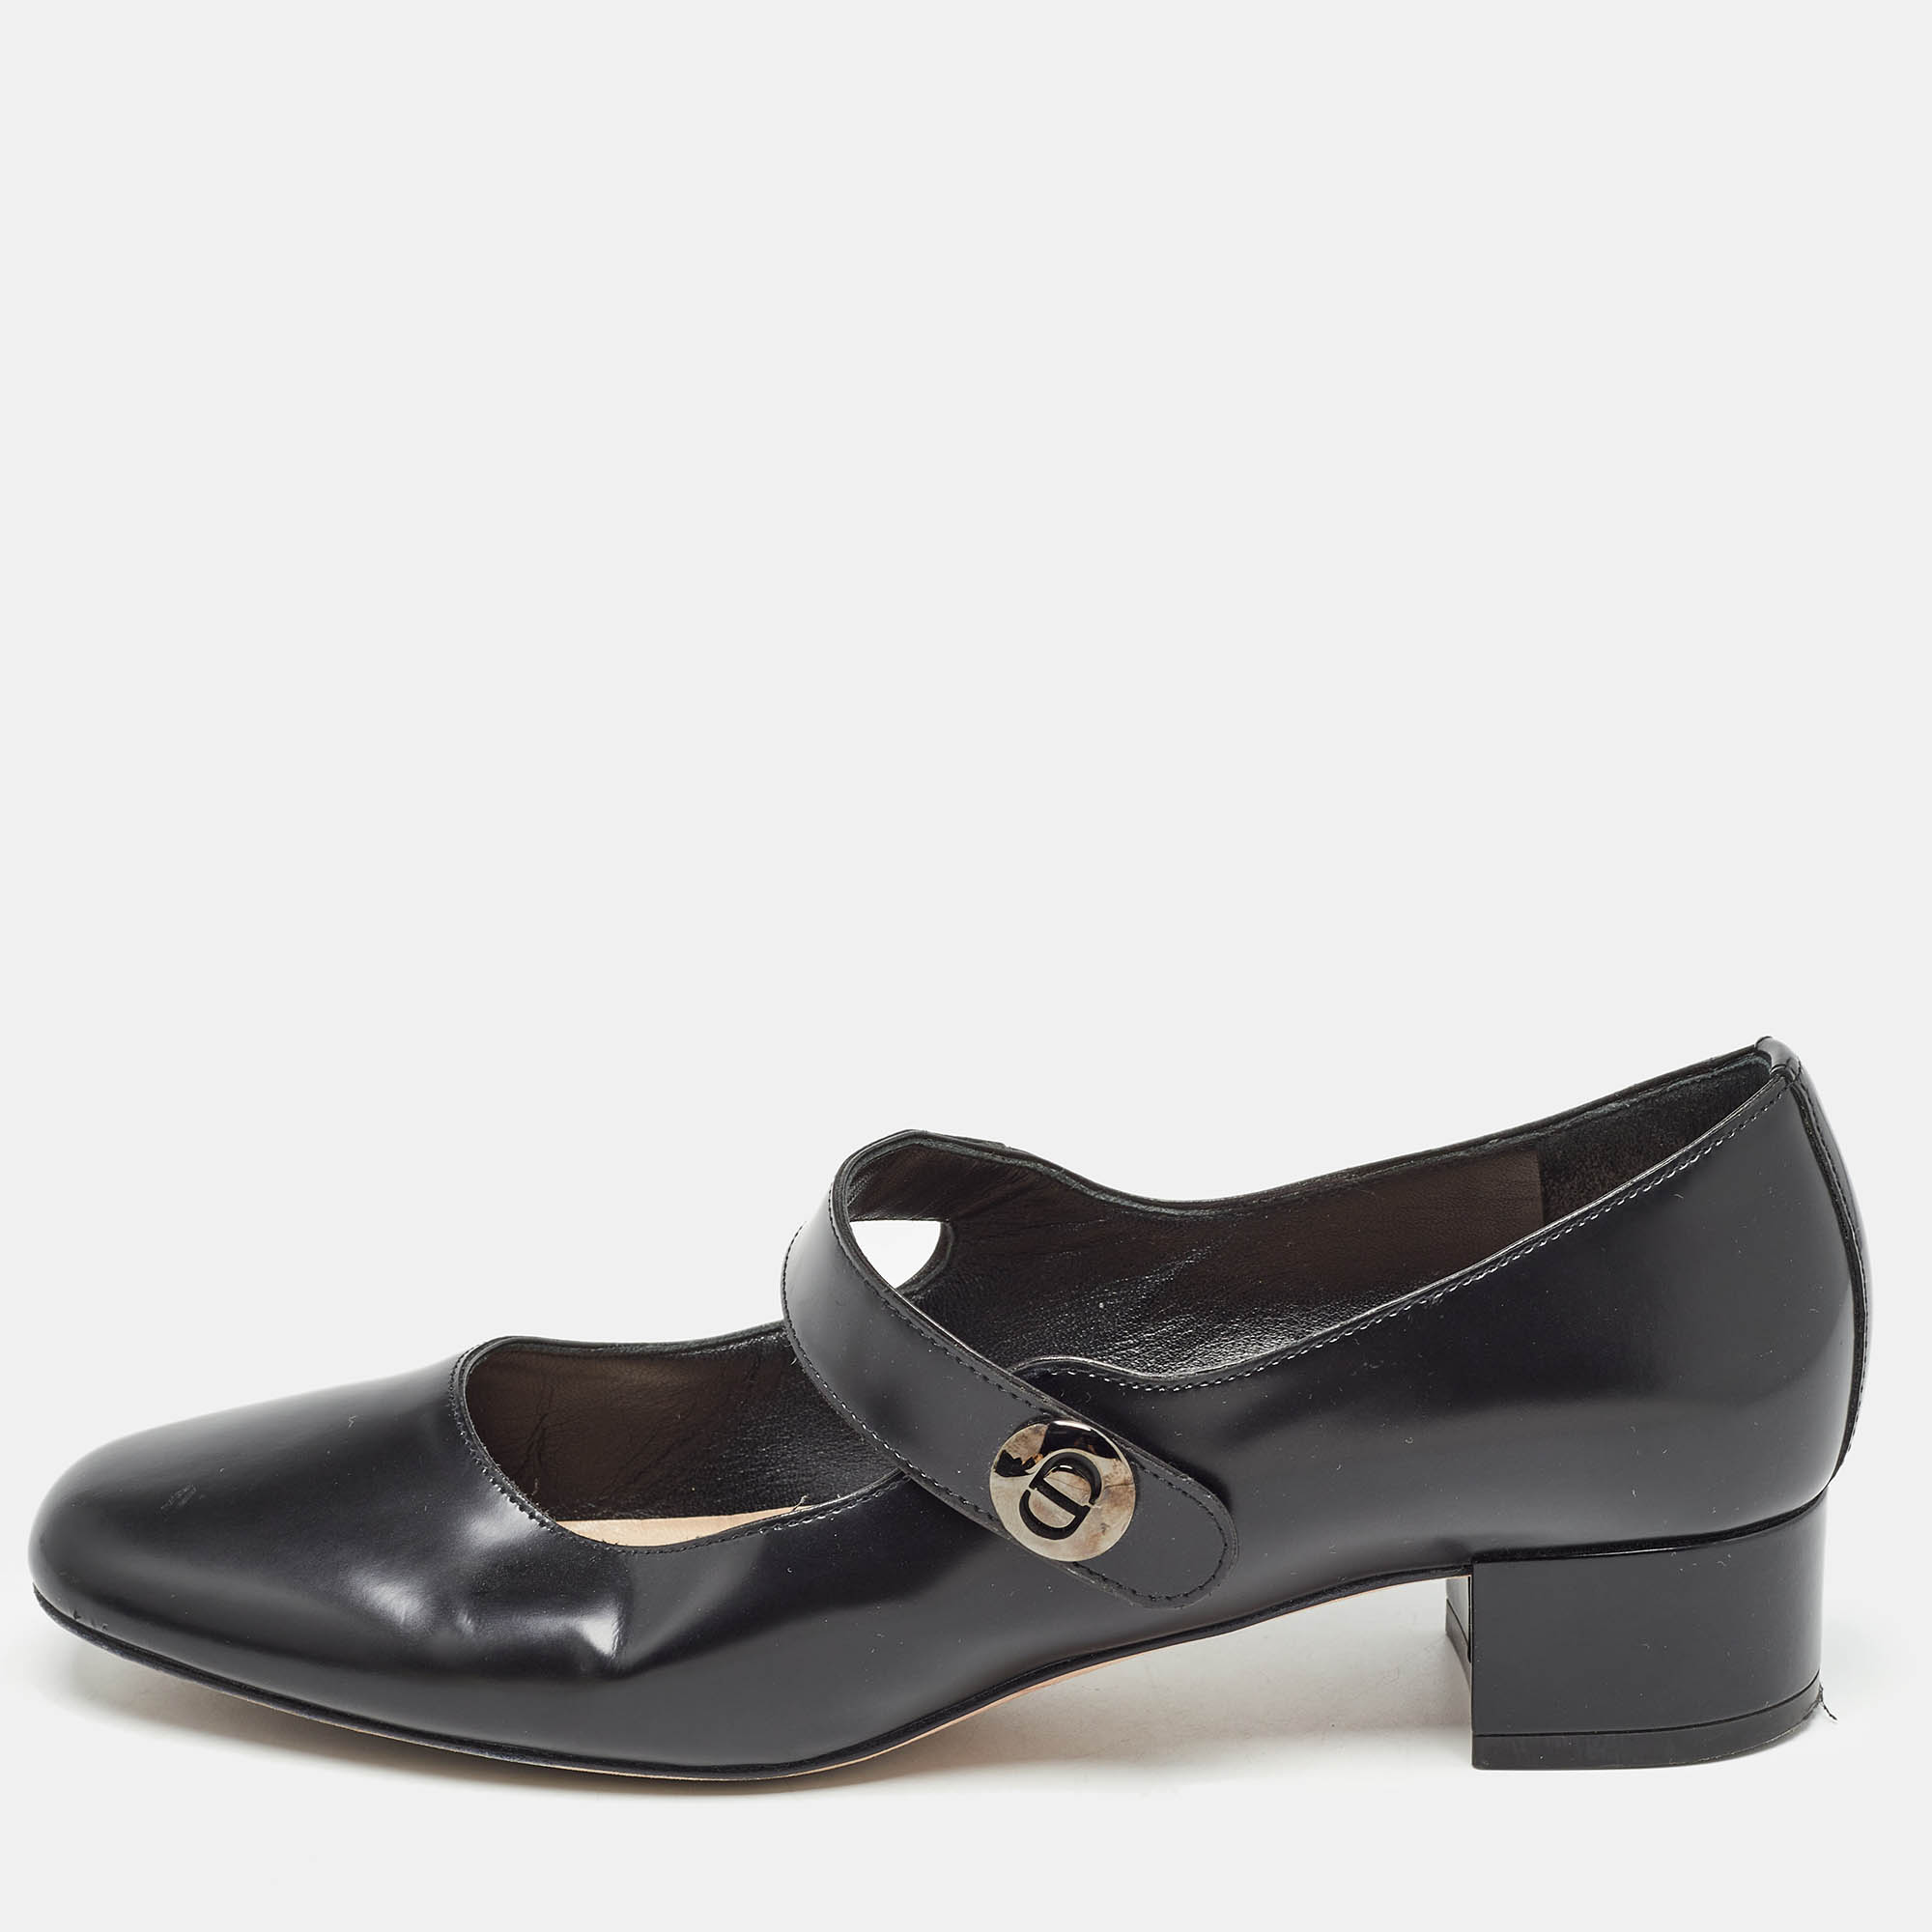 

Dior Black Leather Mary Jane Pumps Size